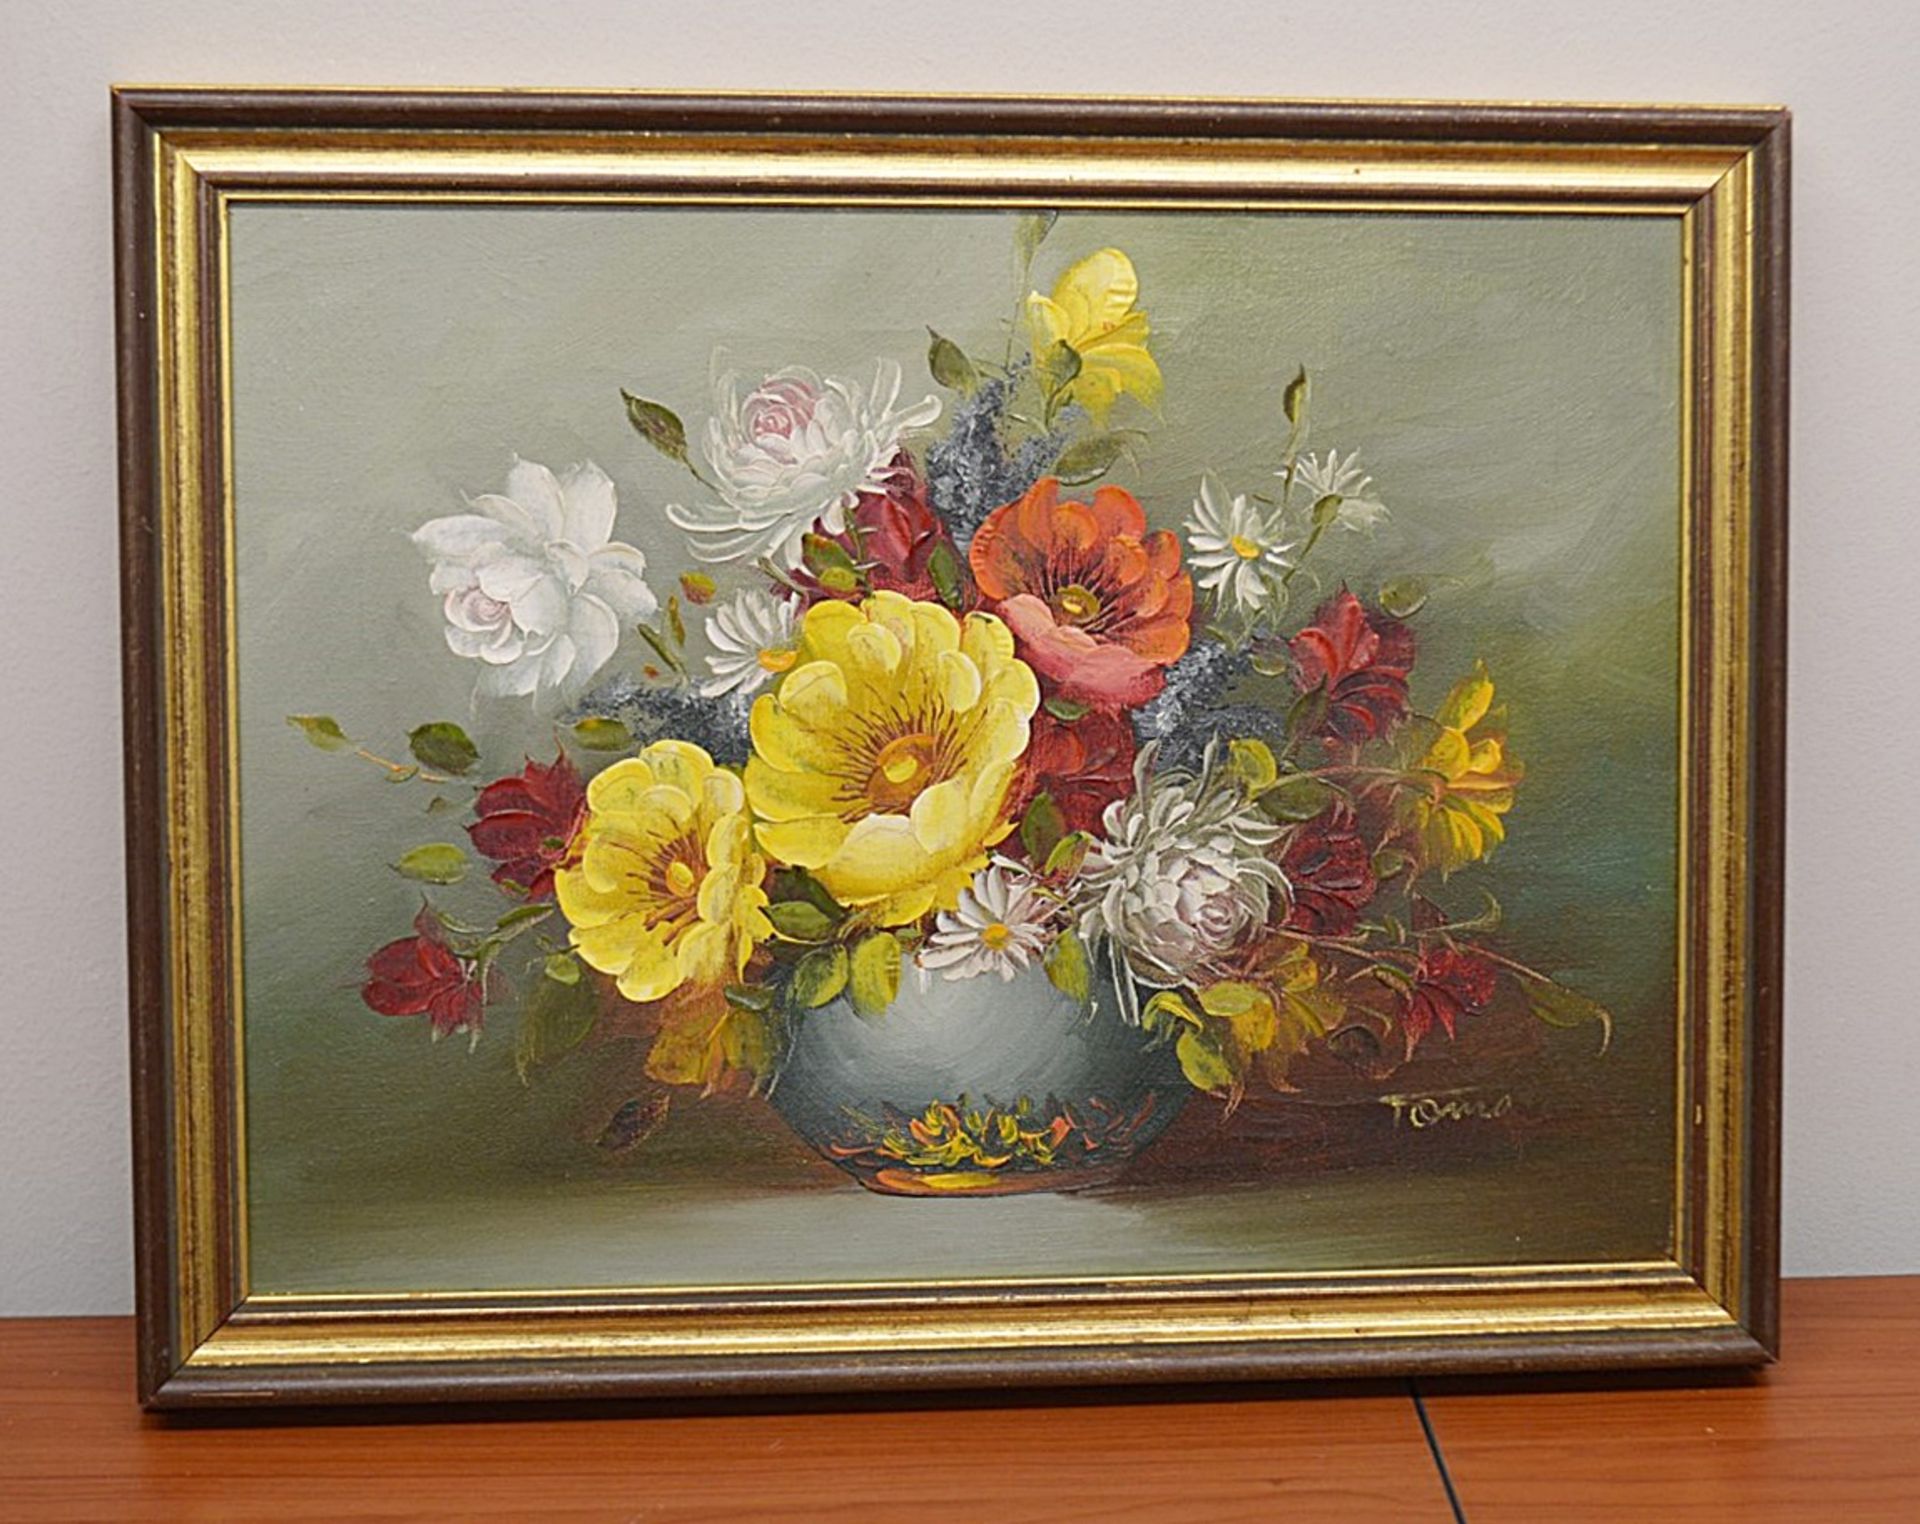 1 x Original Oil Painting Of Flowers On Canvas - Signed By The Artist - Dimensions: 36 x 46cm - Ref: